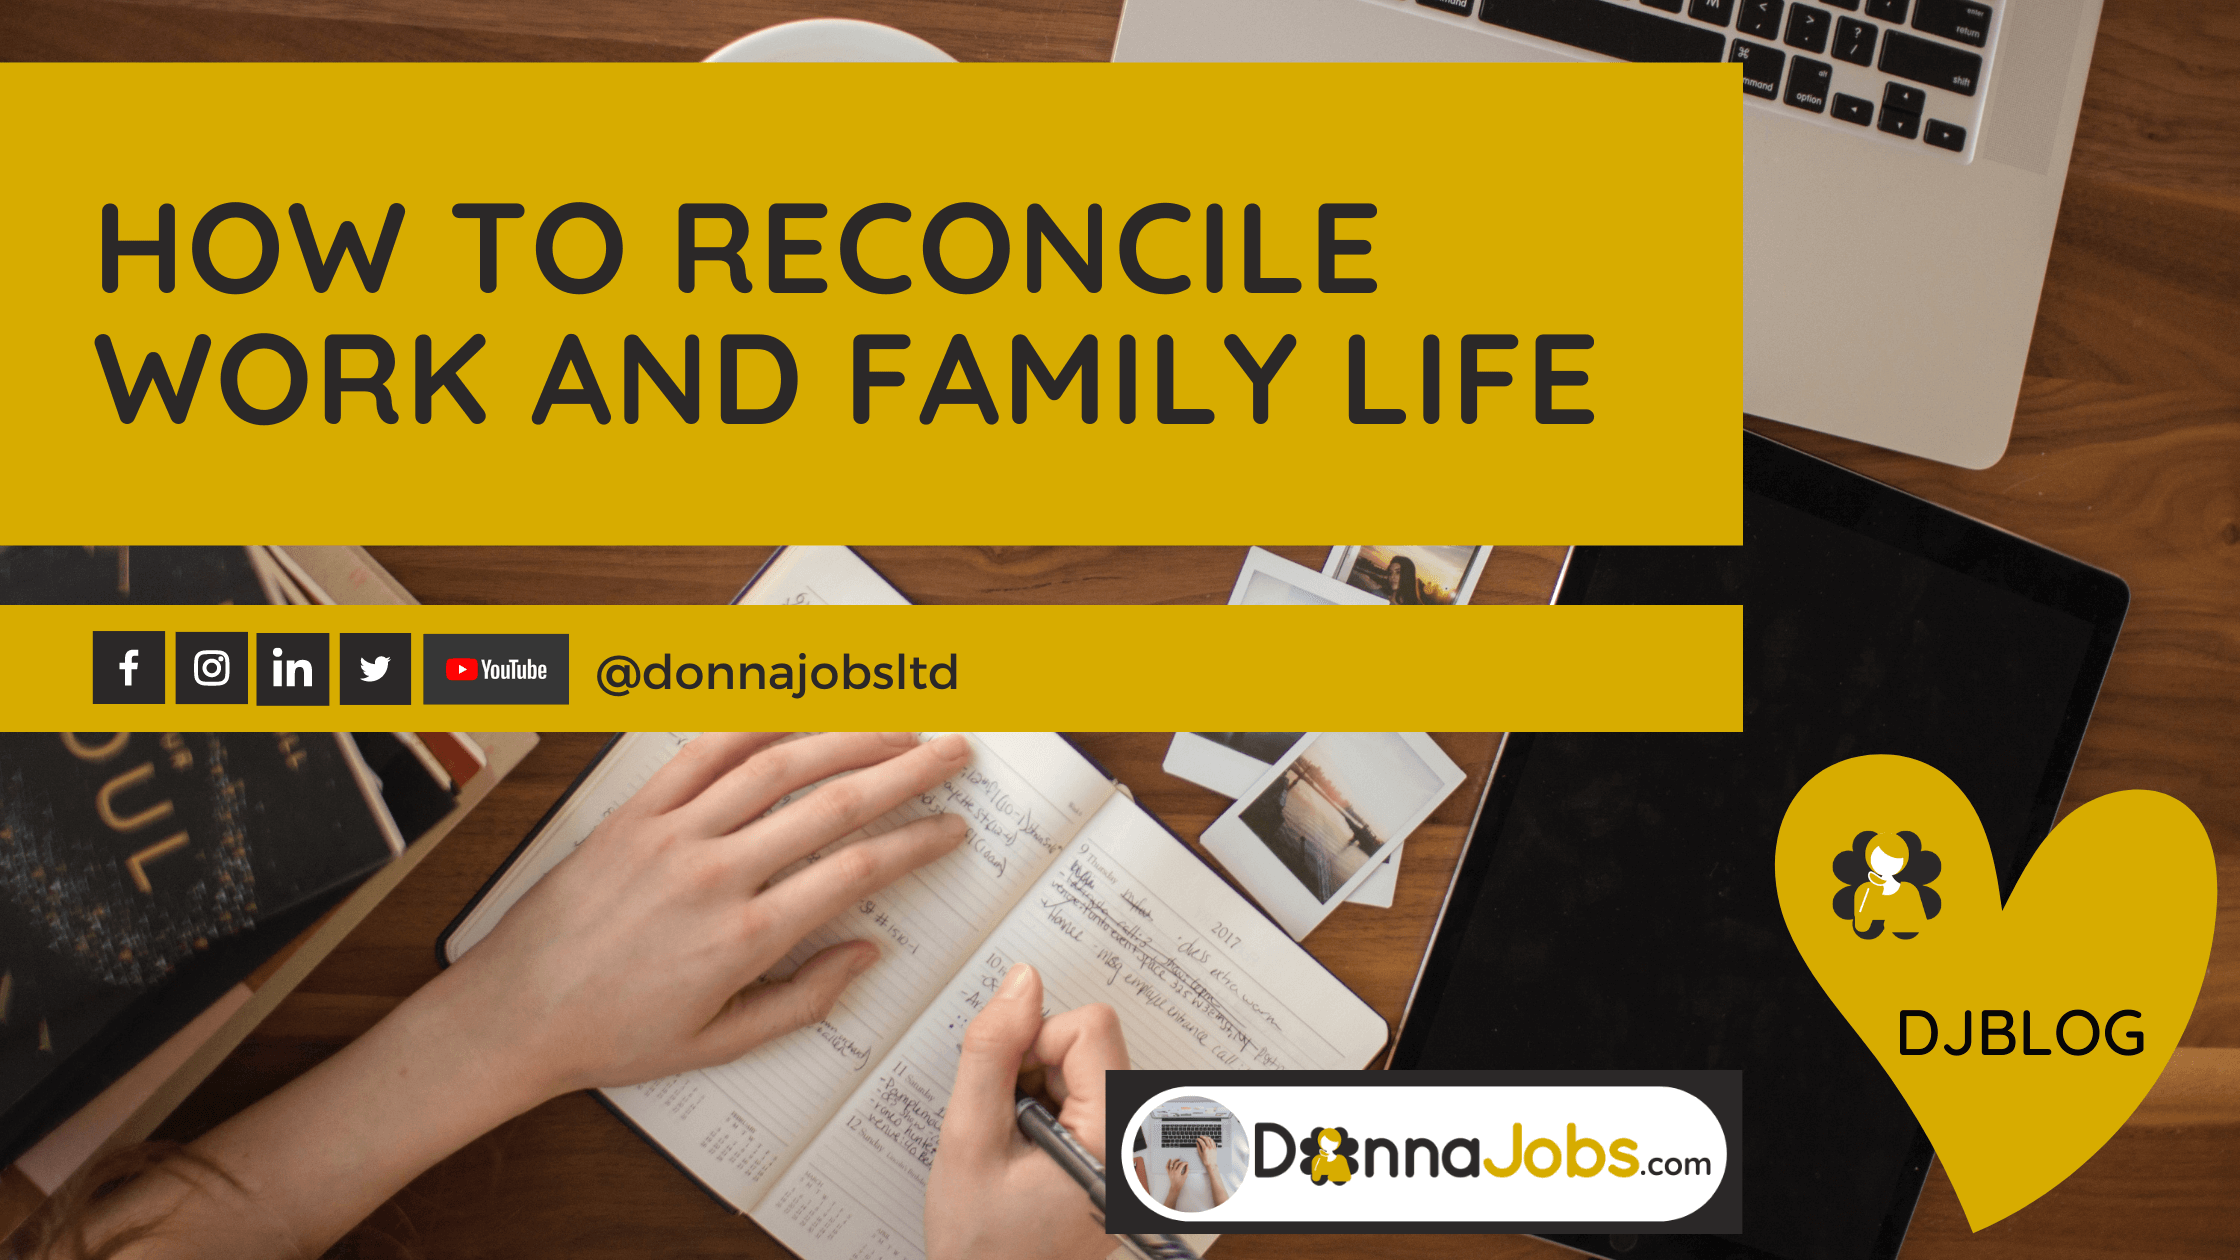 DonnaJobs helps you to reconcile work and family life